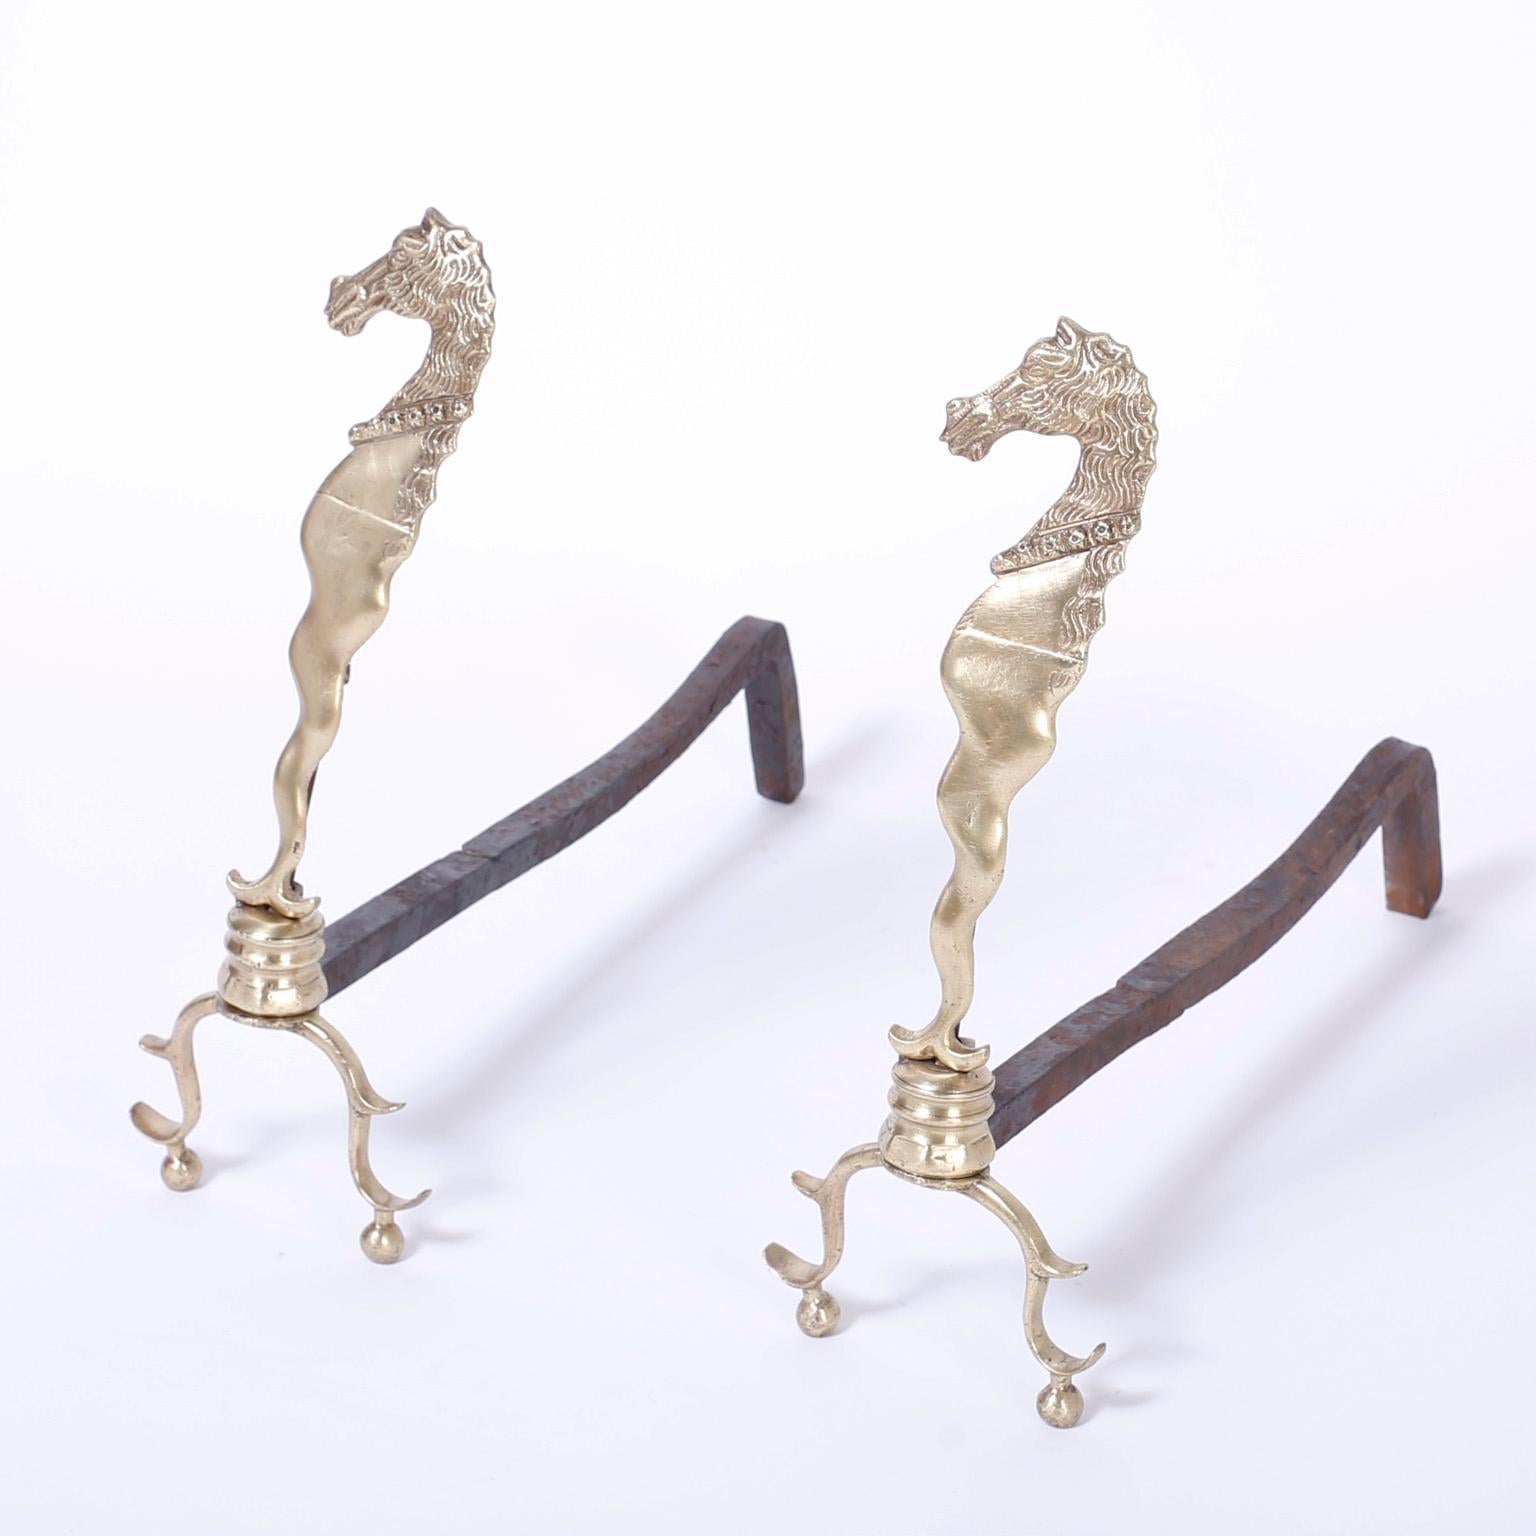 Pair of antique hand polished English brass andirons with sea horses as the main elements over a turned plinth on Queen Anne style cabriole legs and ball feet.